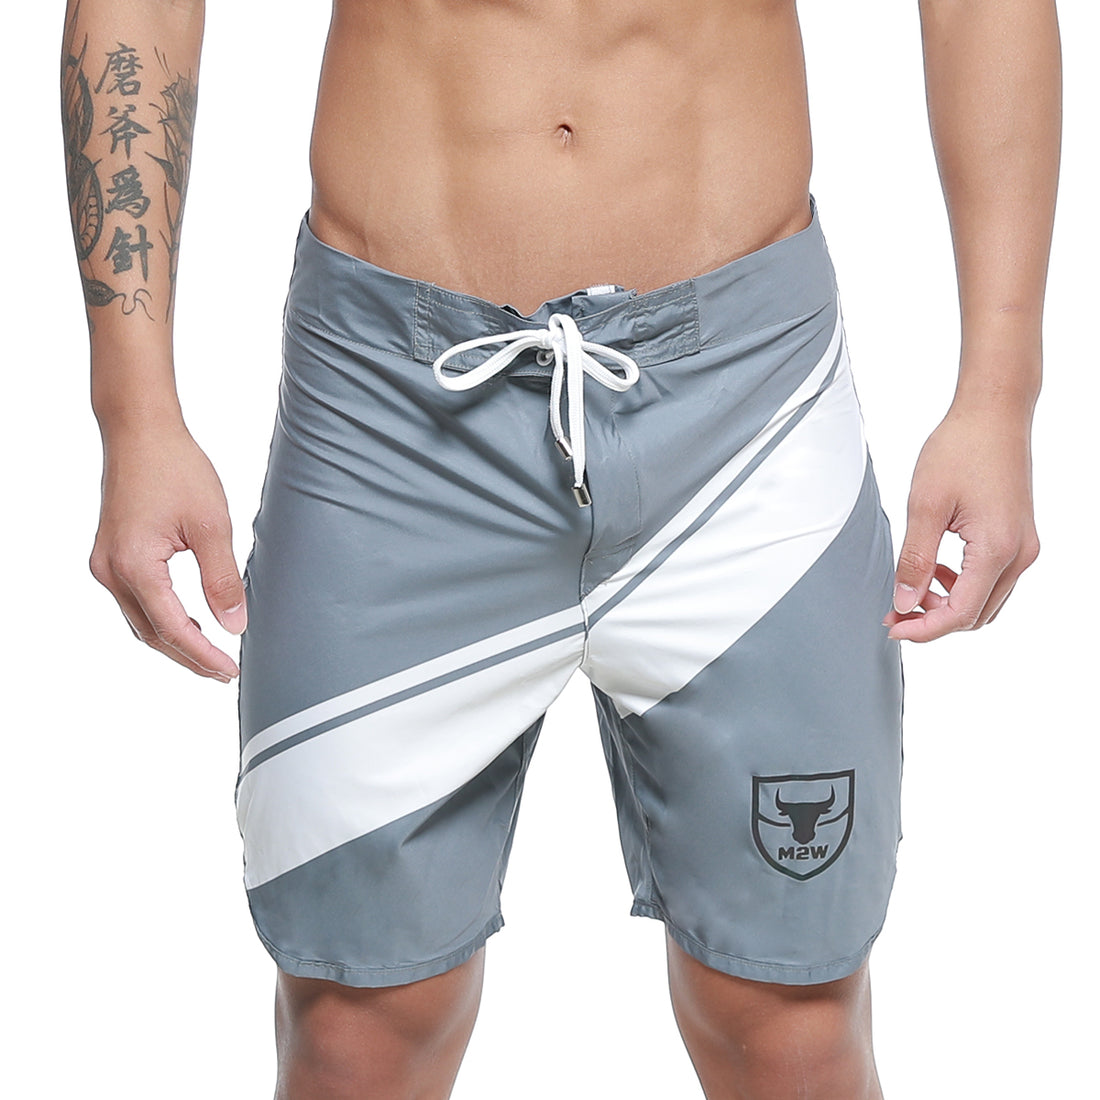 [MetroMuscleWear] Insignia Physique Board Short Charcoal (4716-11)